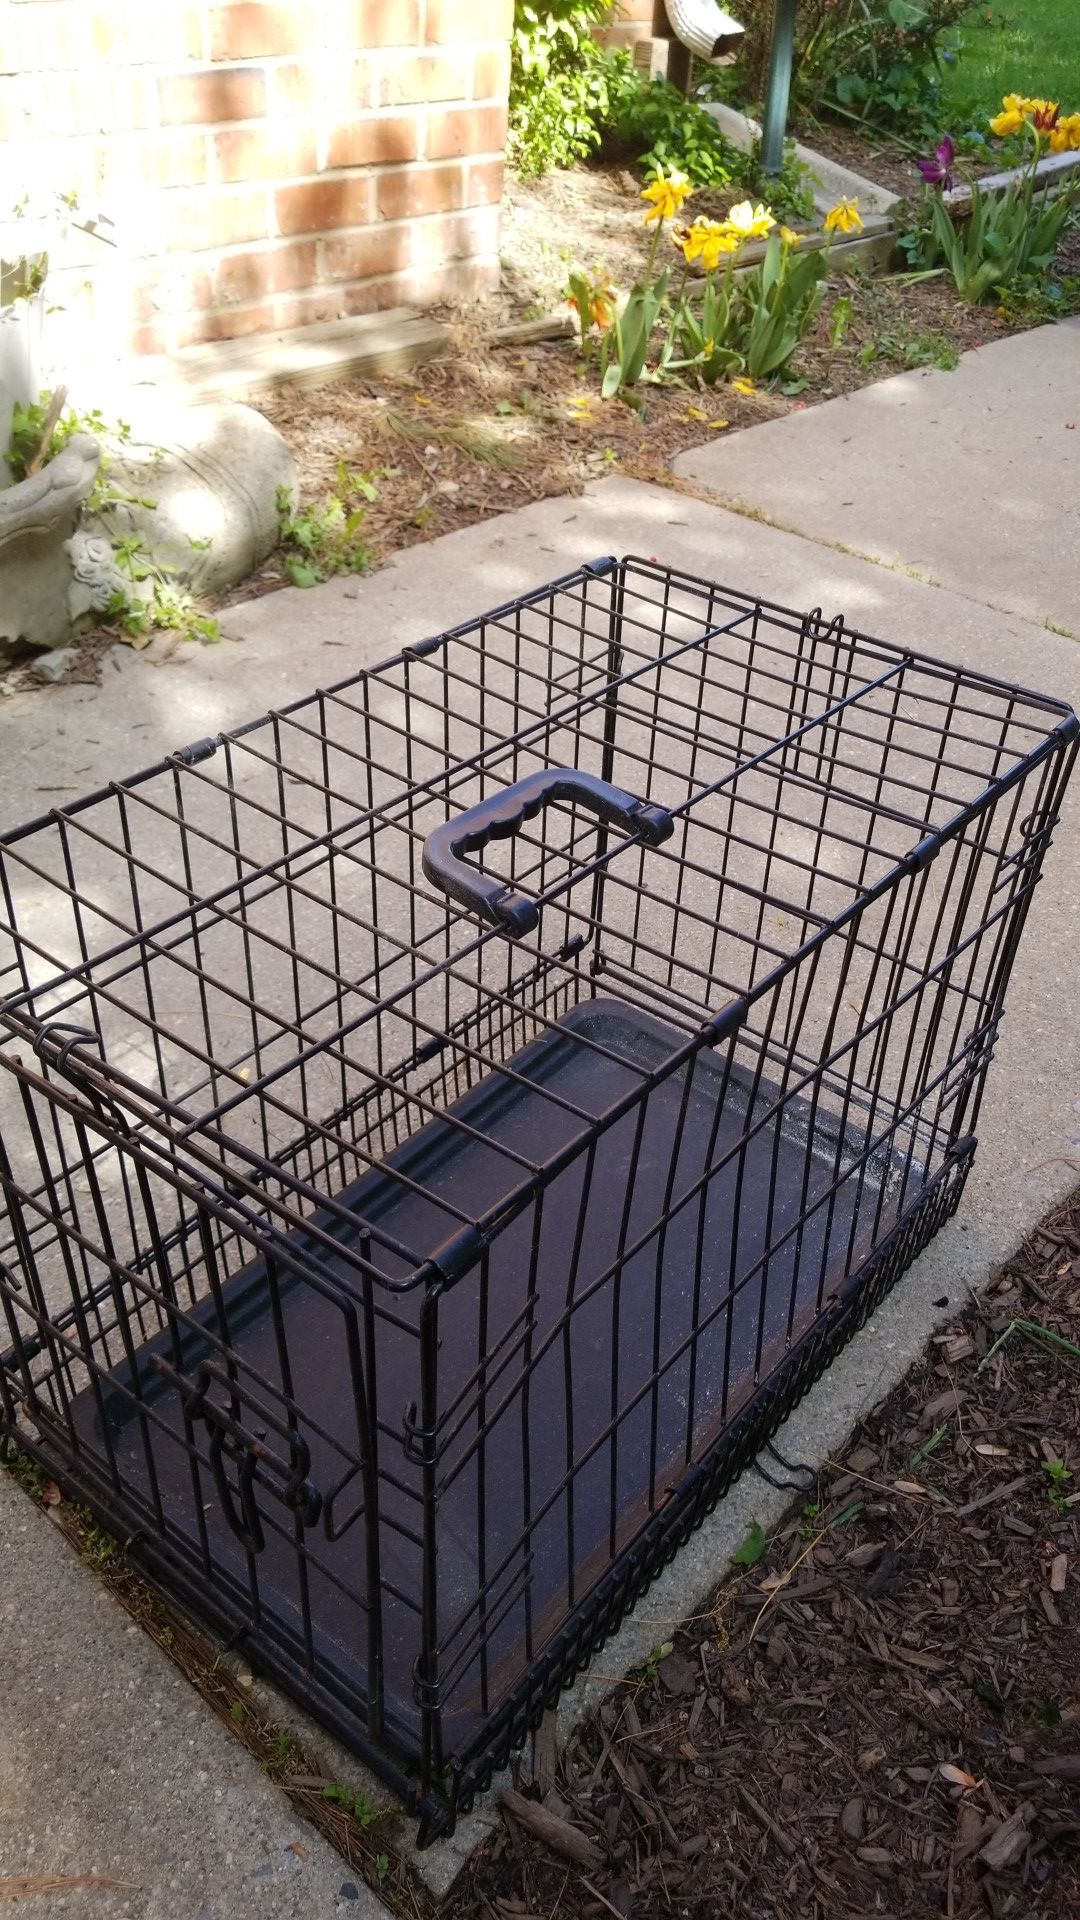 Small dog/ puppy/ cat/ kitten cage or carrier